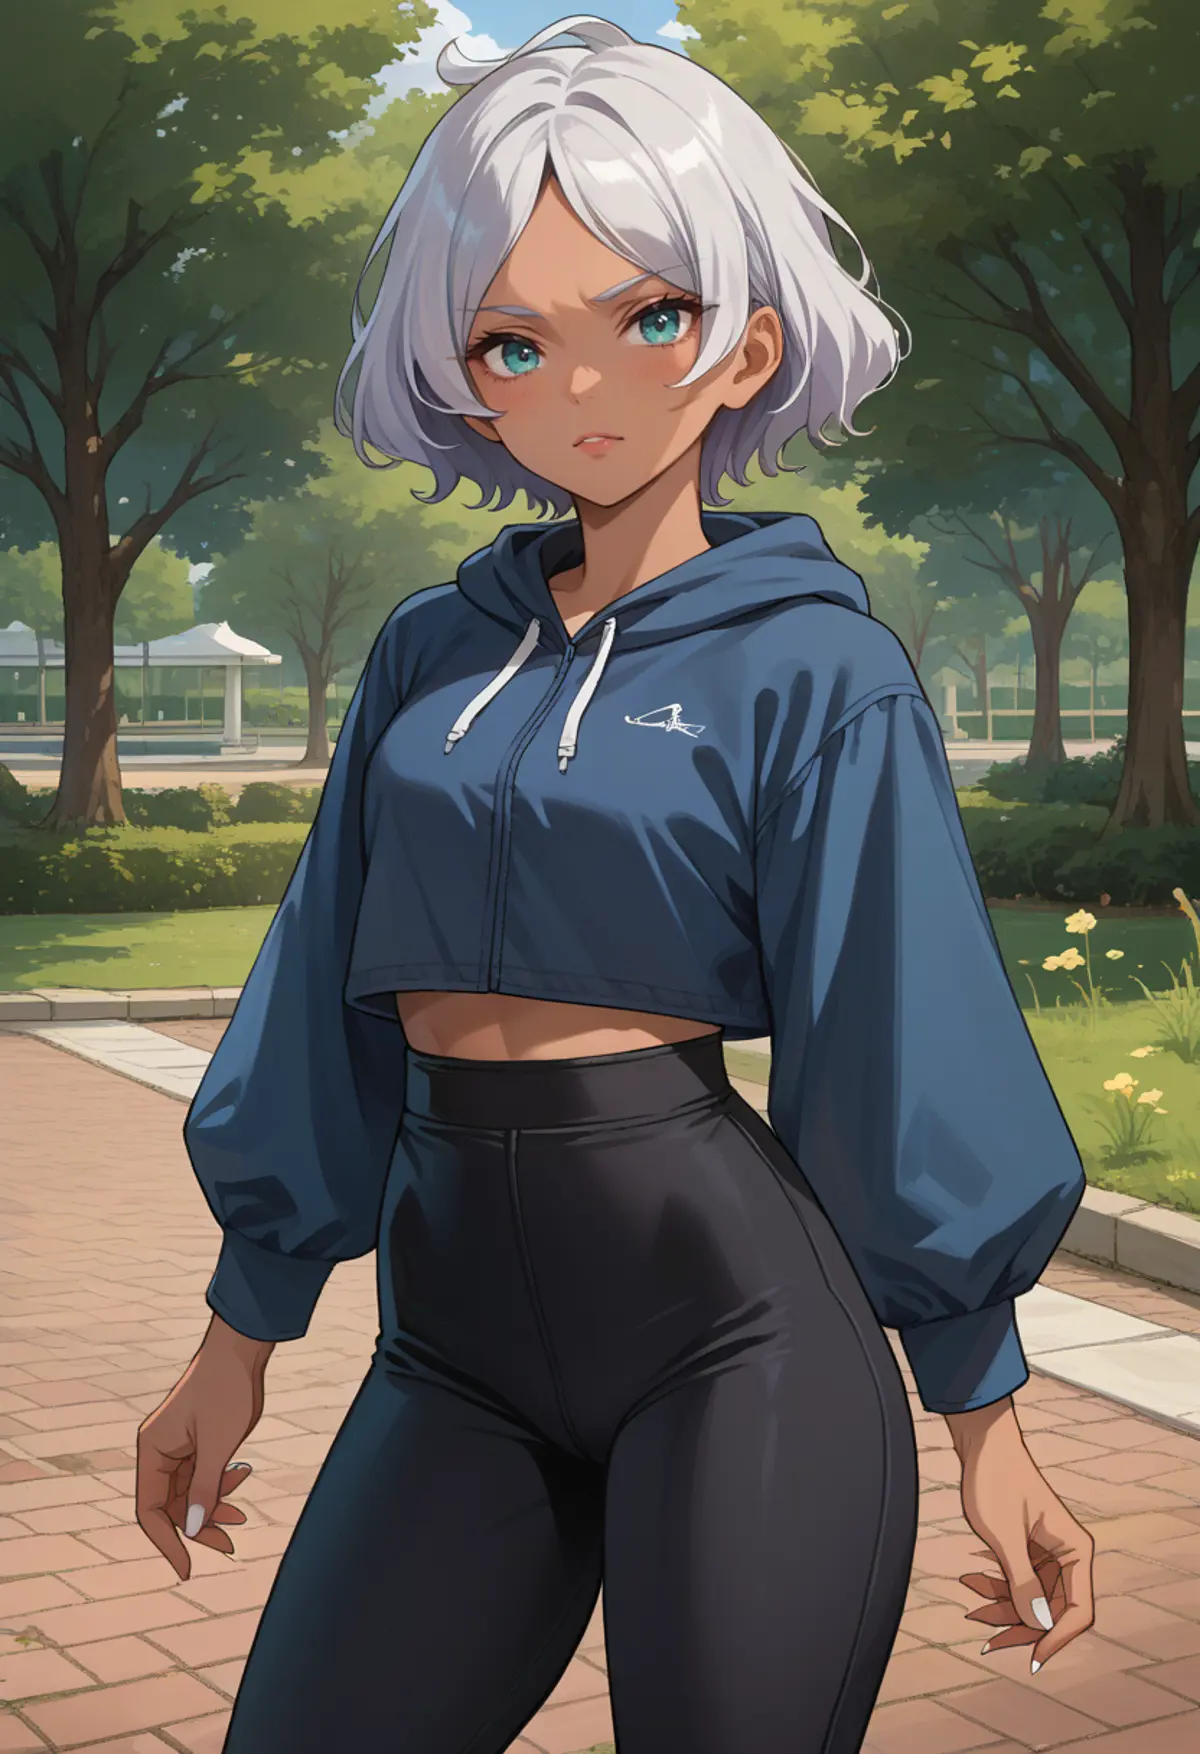 A young woman with silver hair and turquoise eyes standing on a paved path in a park setting. She is dressed in a blue cropped hoodie and black pants. 